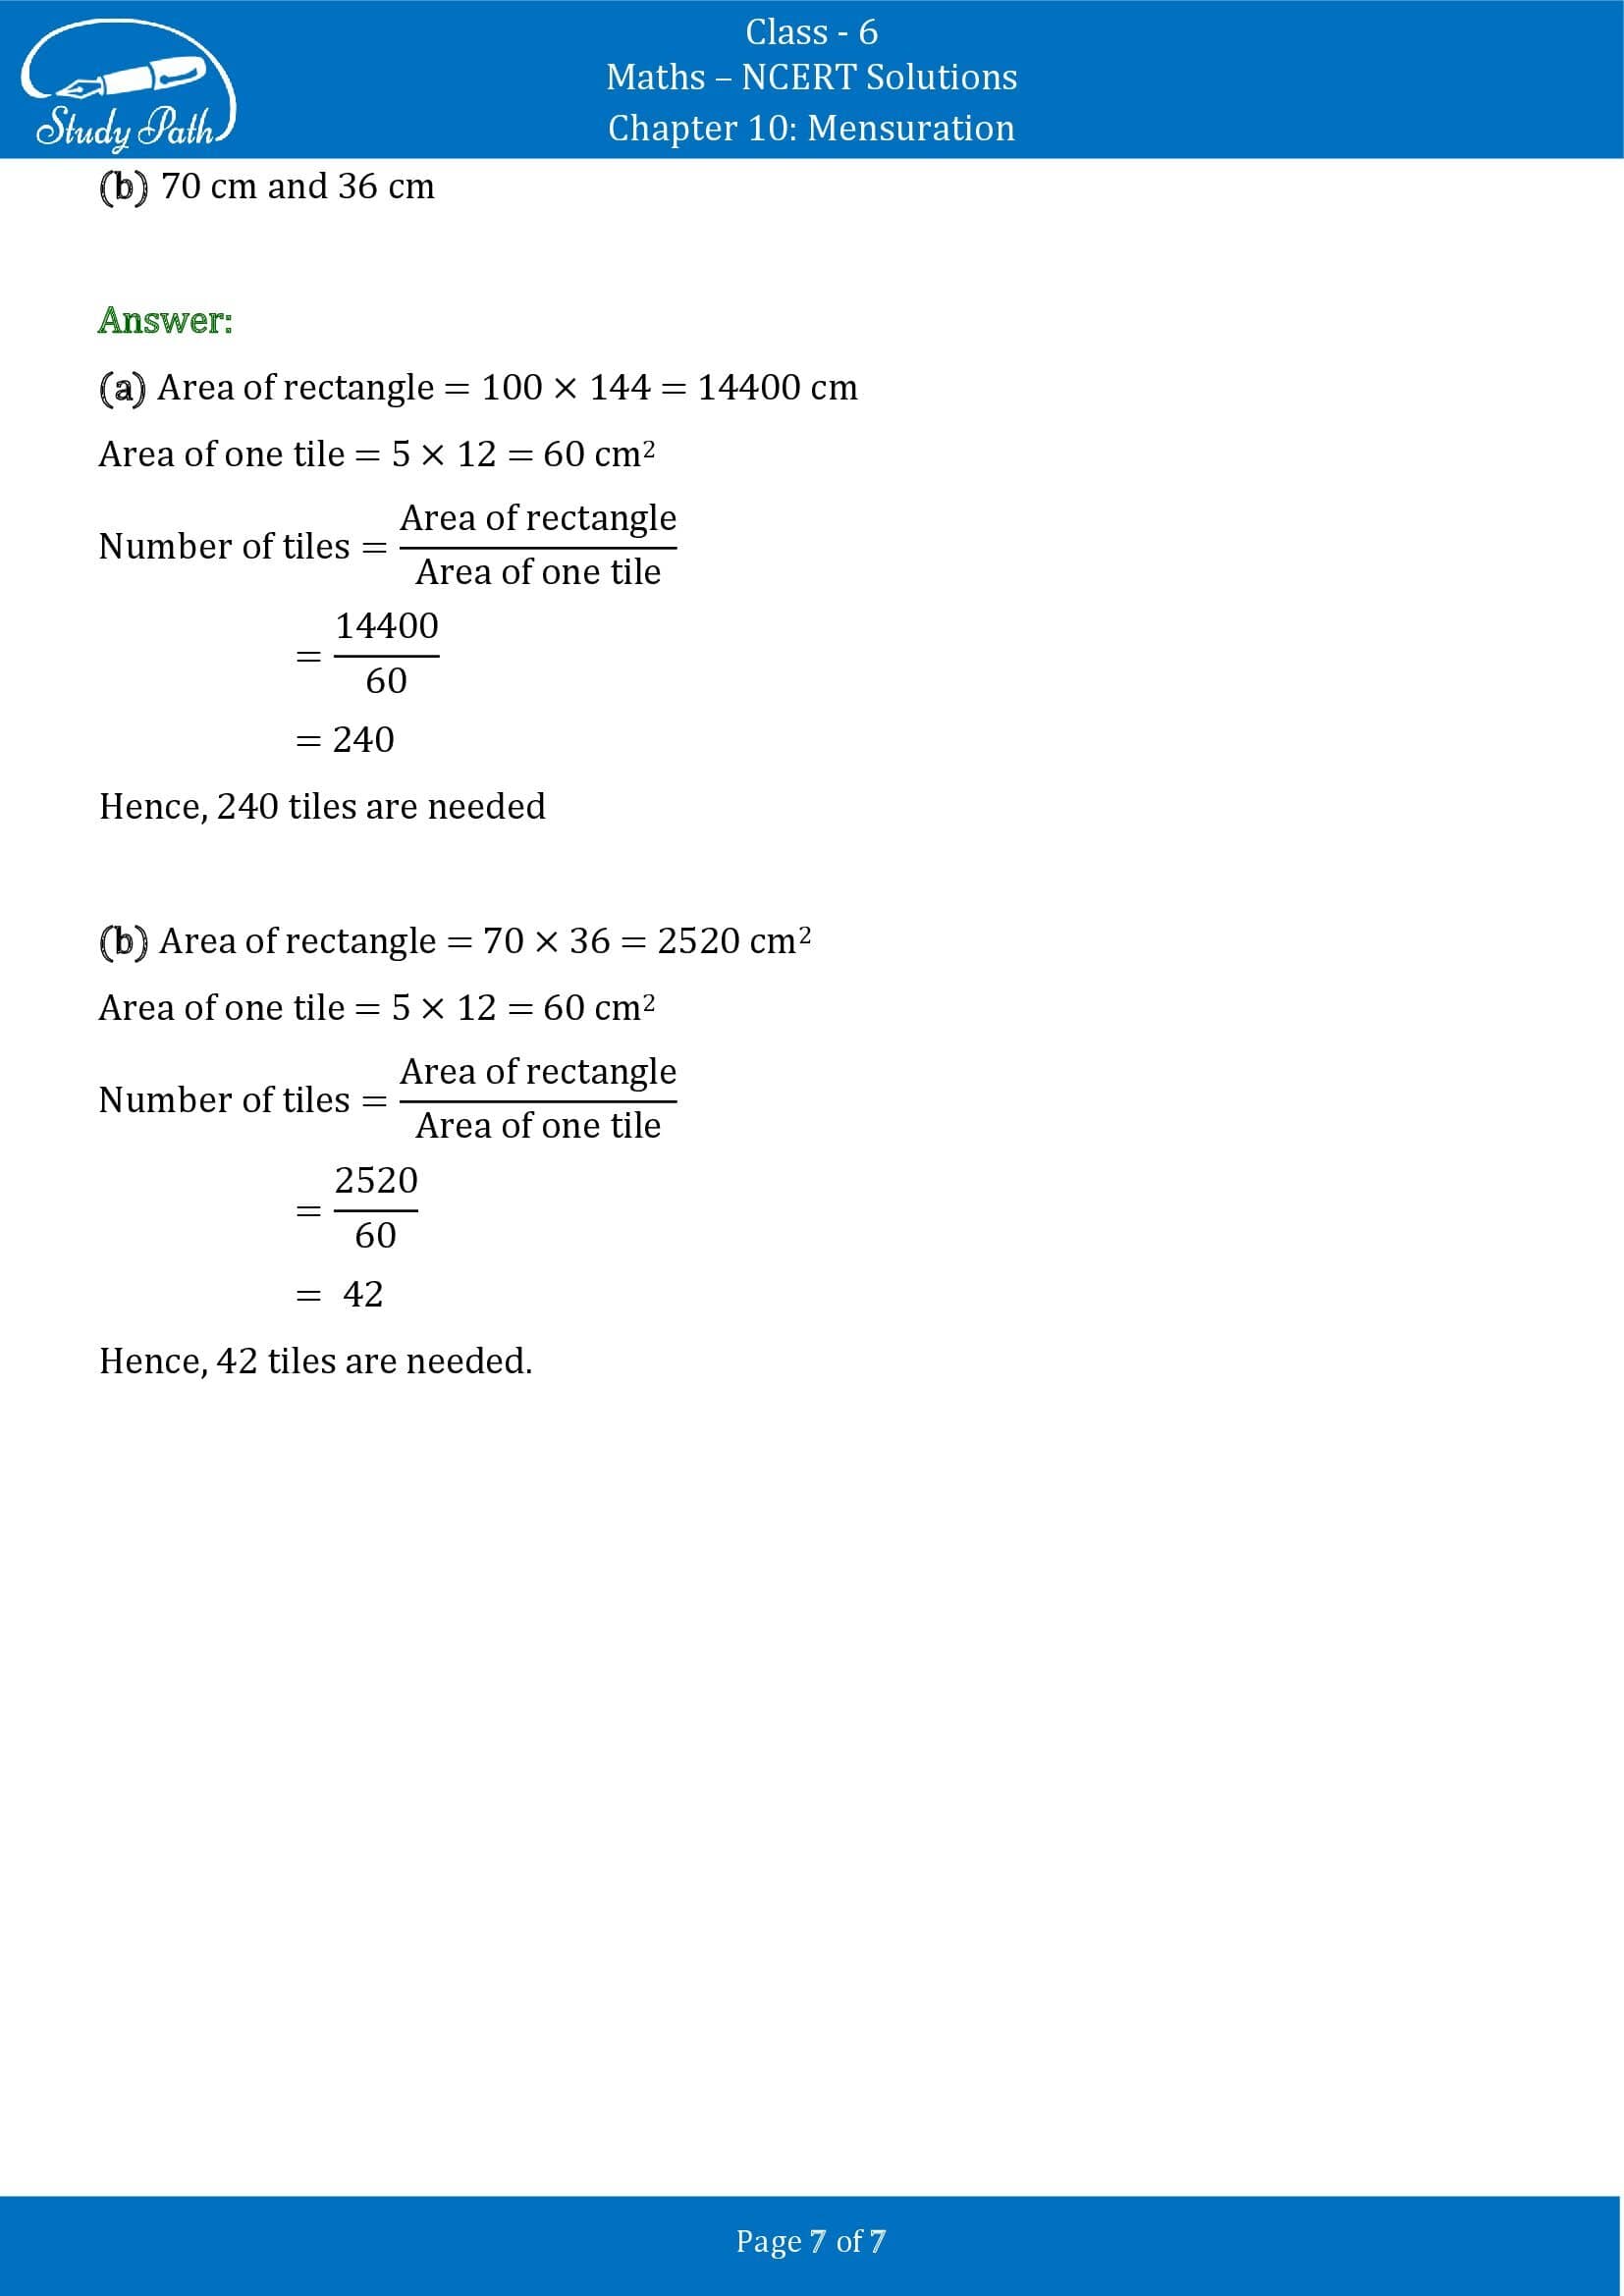 NCERT Solutions for Class 6 Maths Chapter 10 Mensuration Exercise 10.3 00007